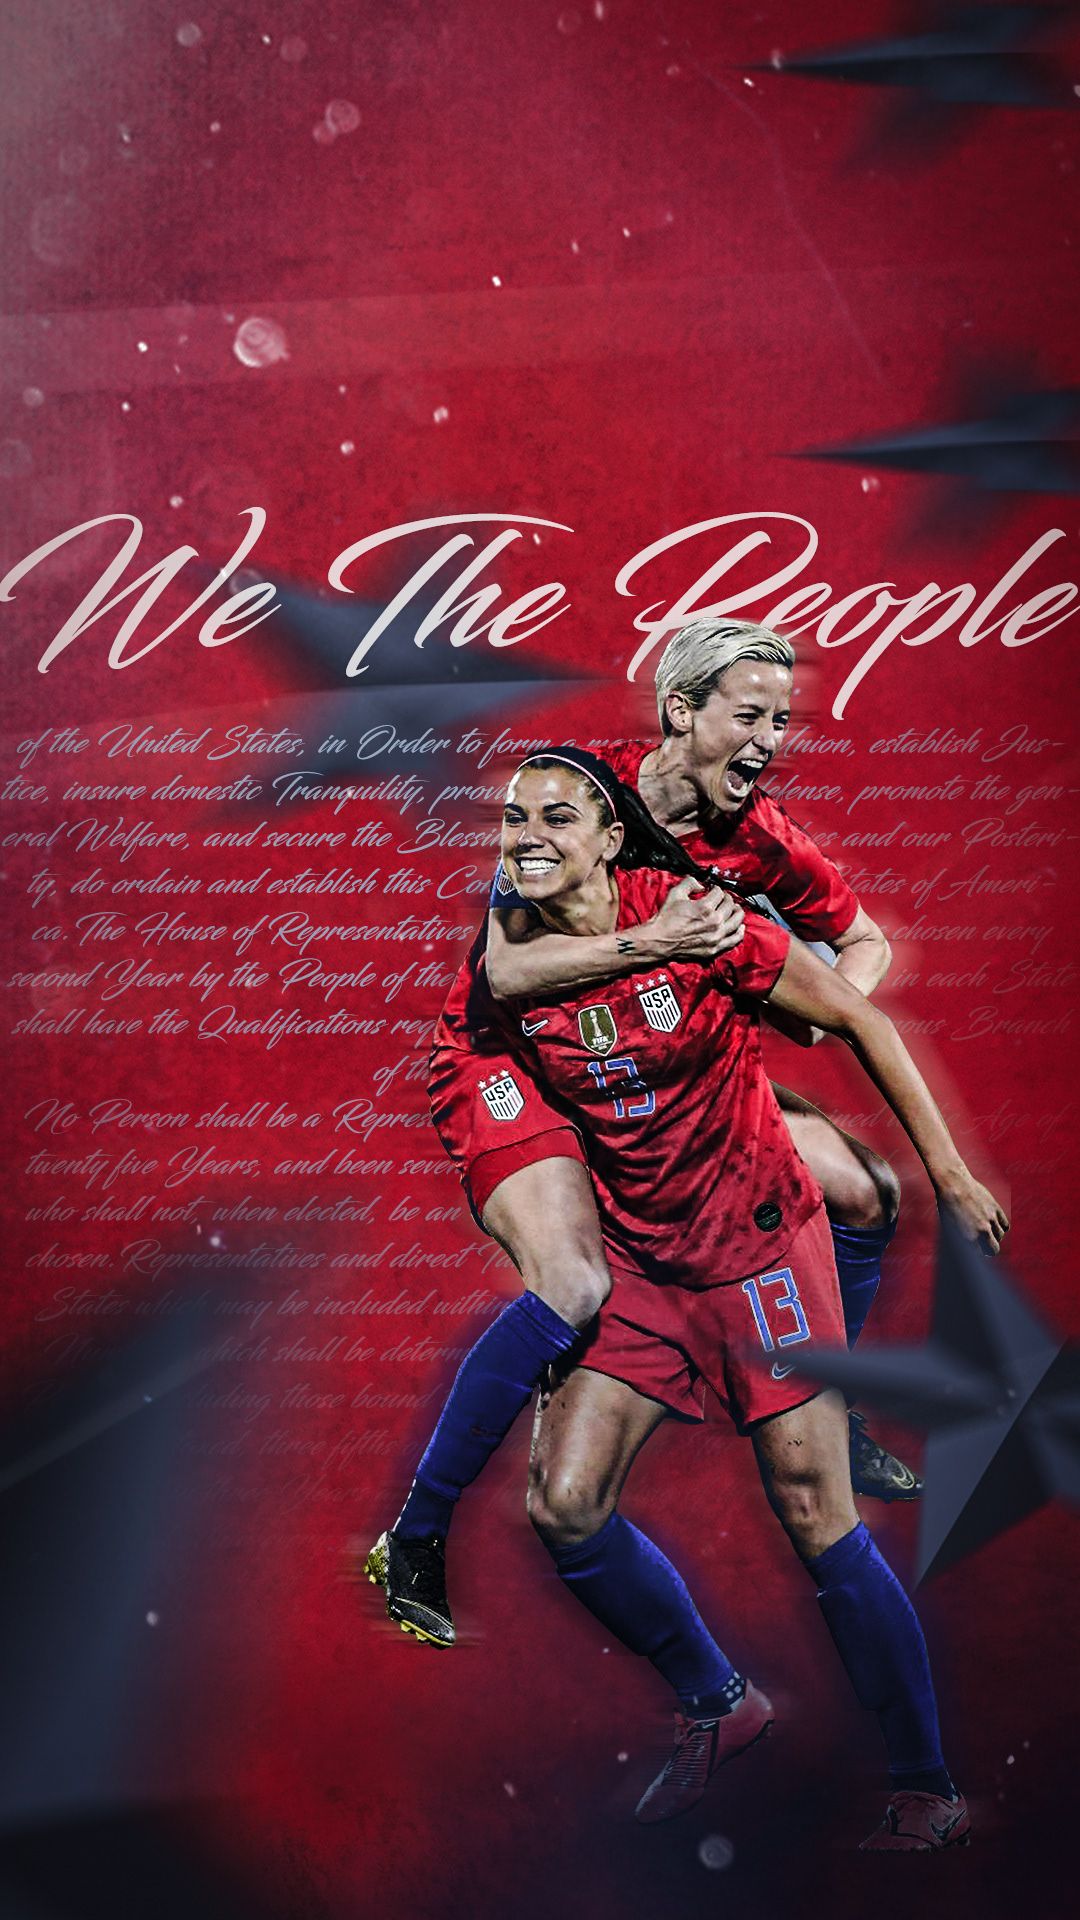 We The People USWNT Poster Wallpaper